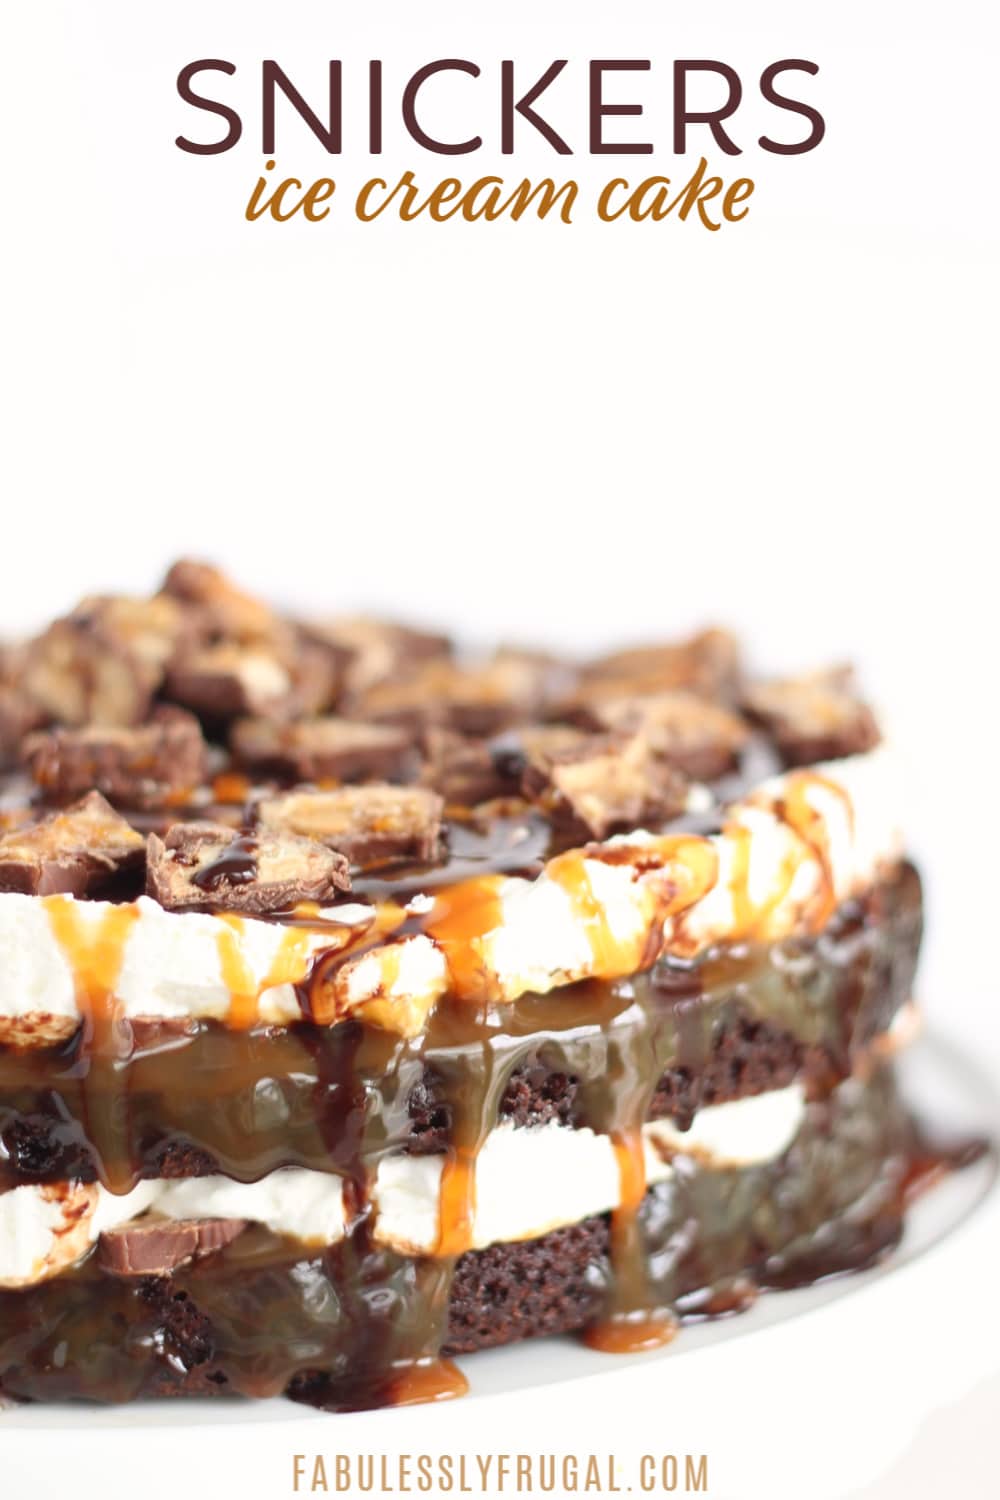 Snickers ice cream cake recipe with brownies. So delicious!